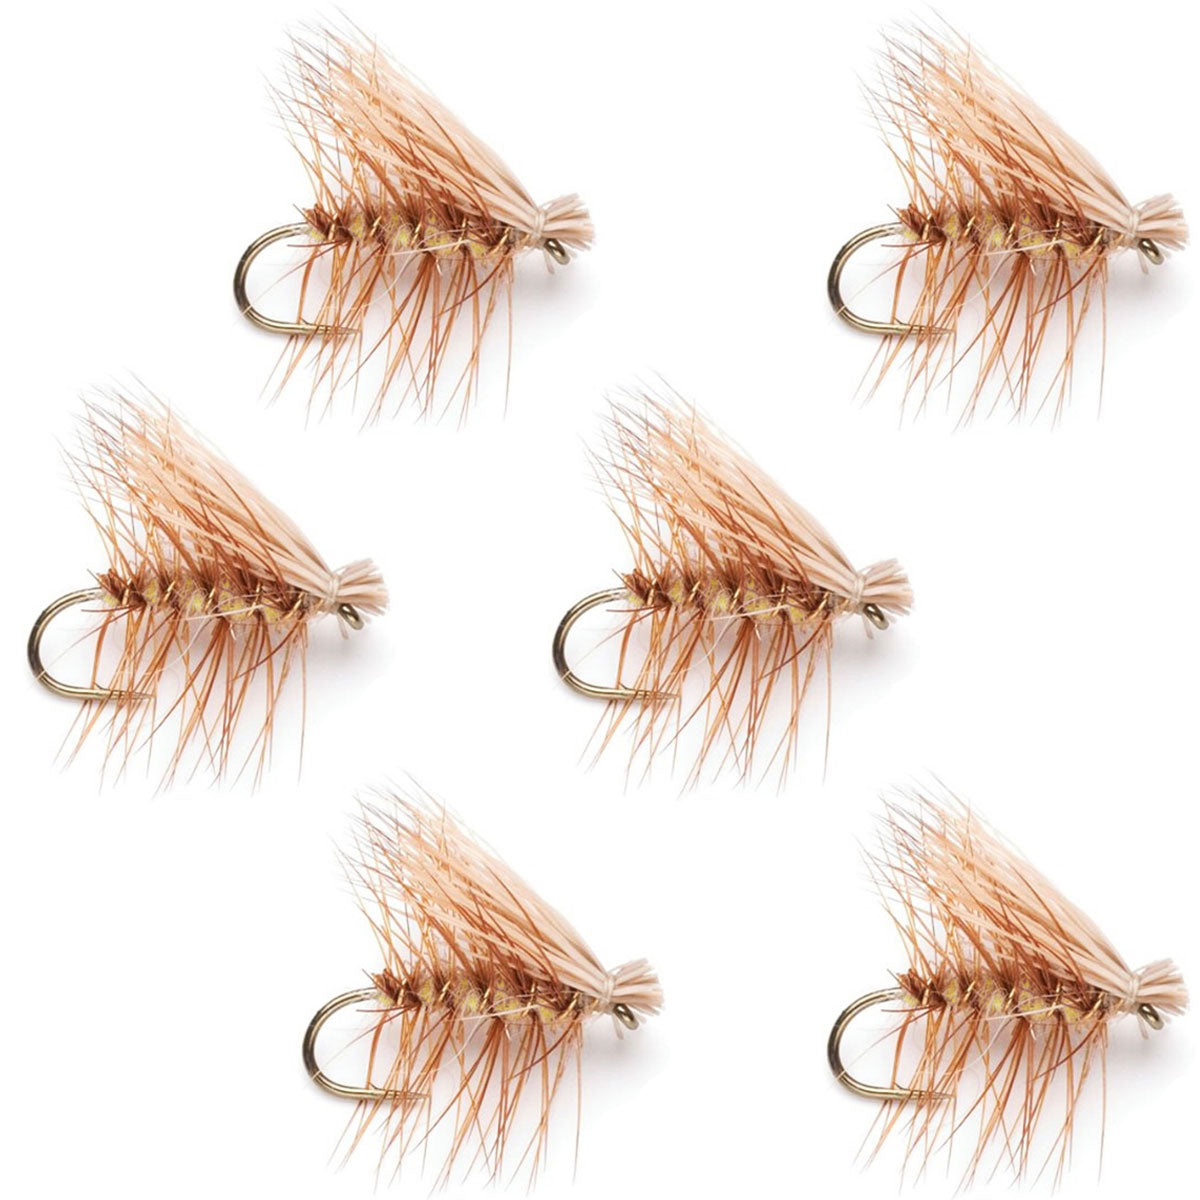 Yellow Elk Hair Caddis Classic Trout Dry Fly - Set of 6 Flies Size 12